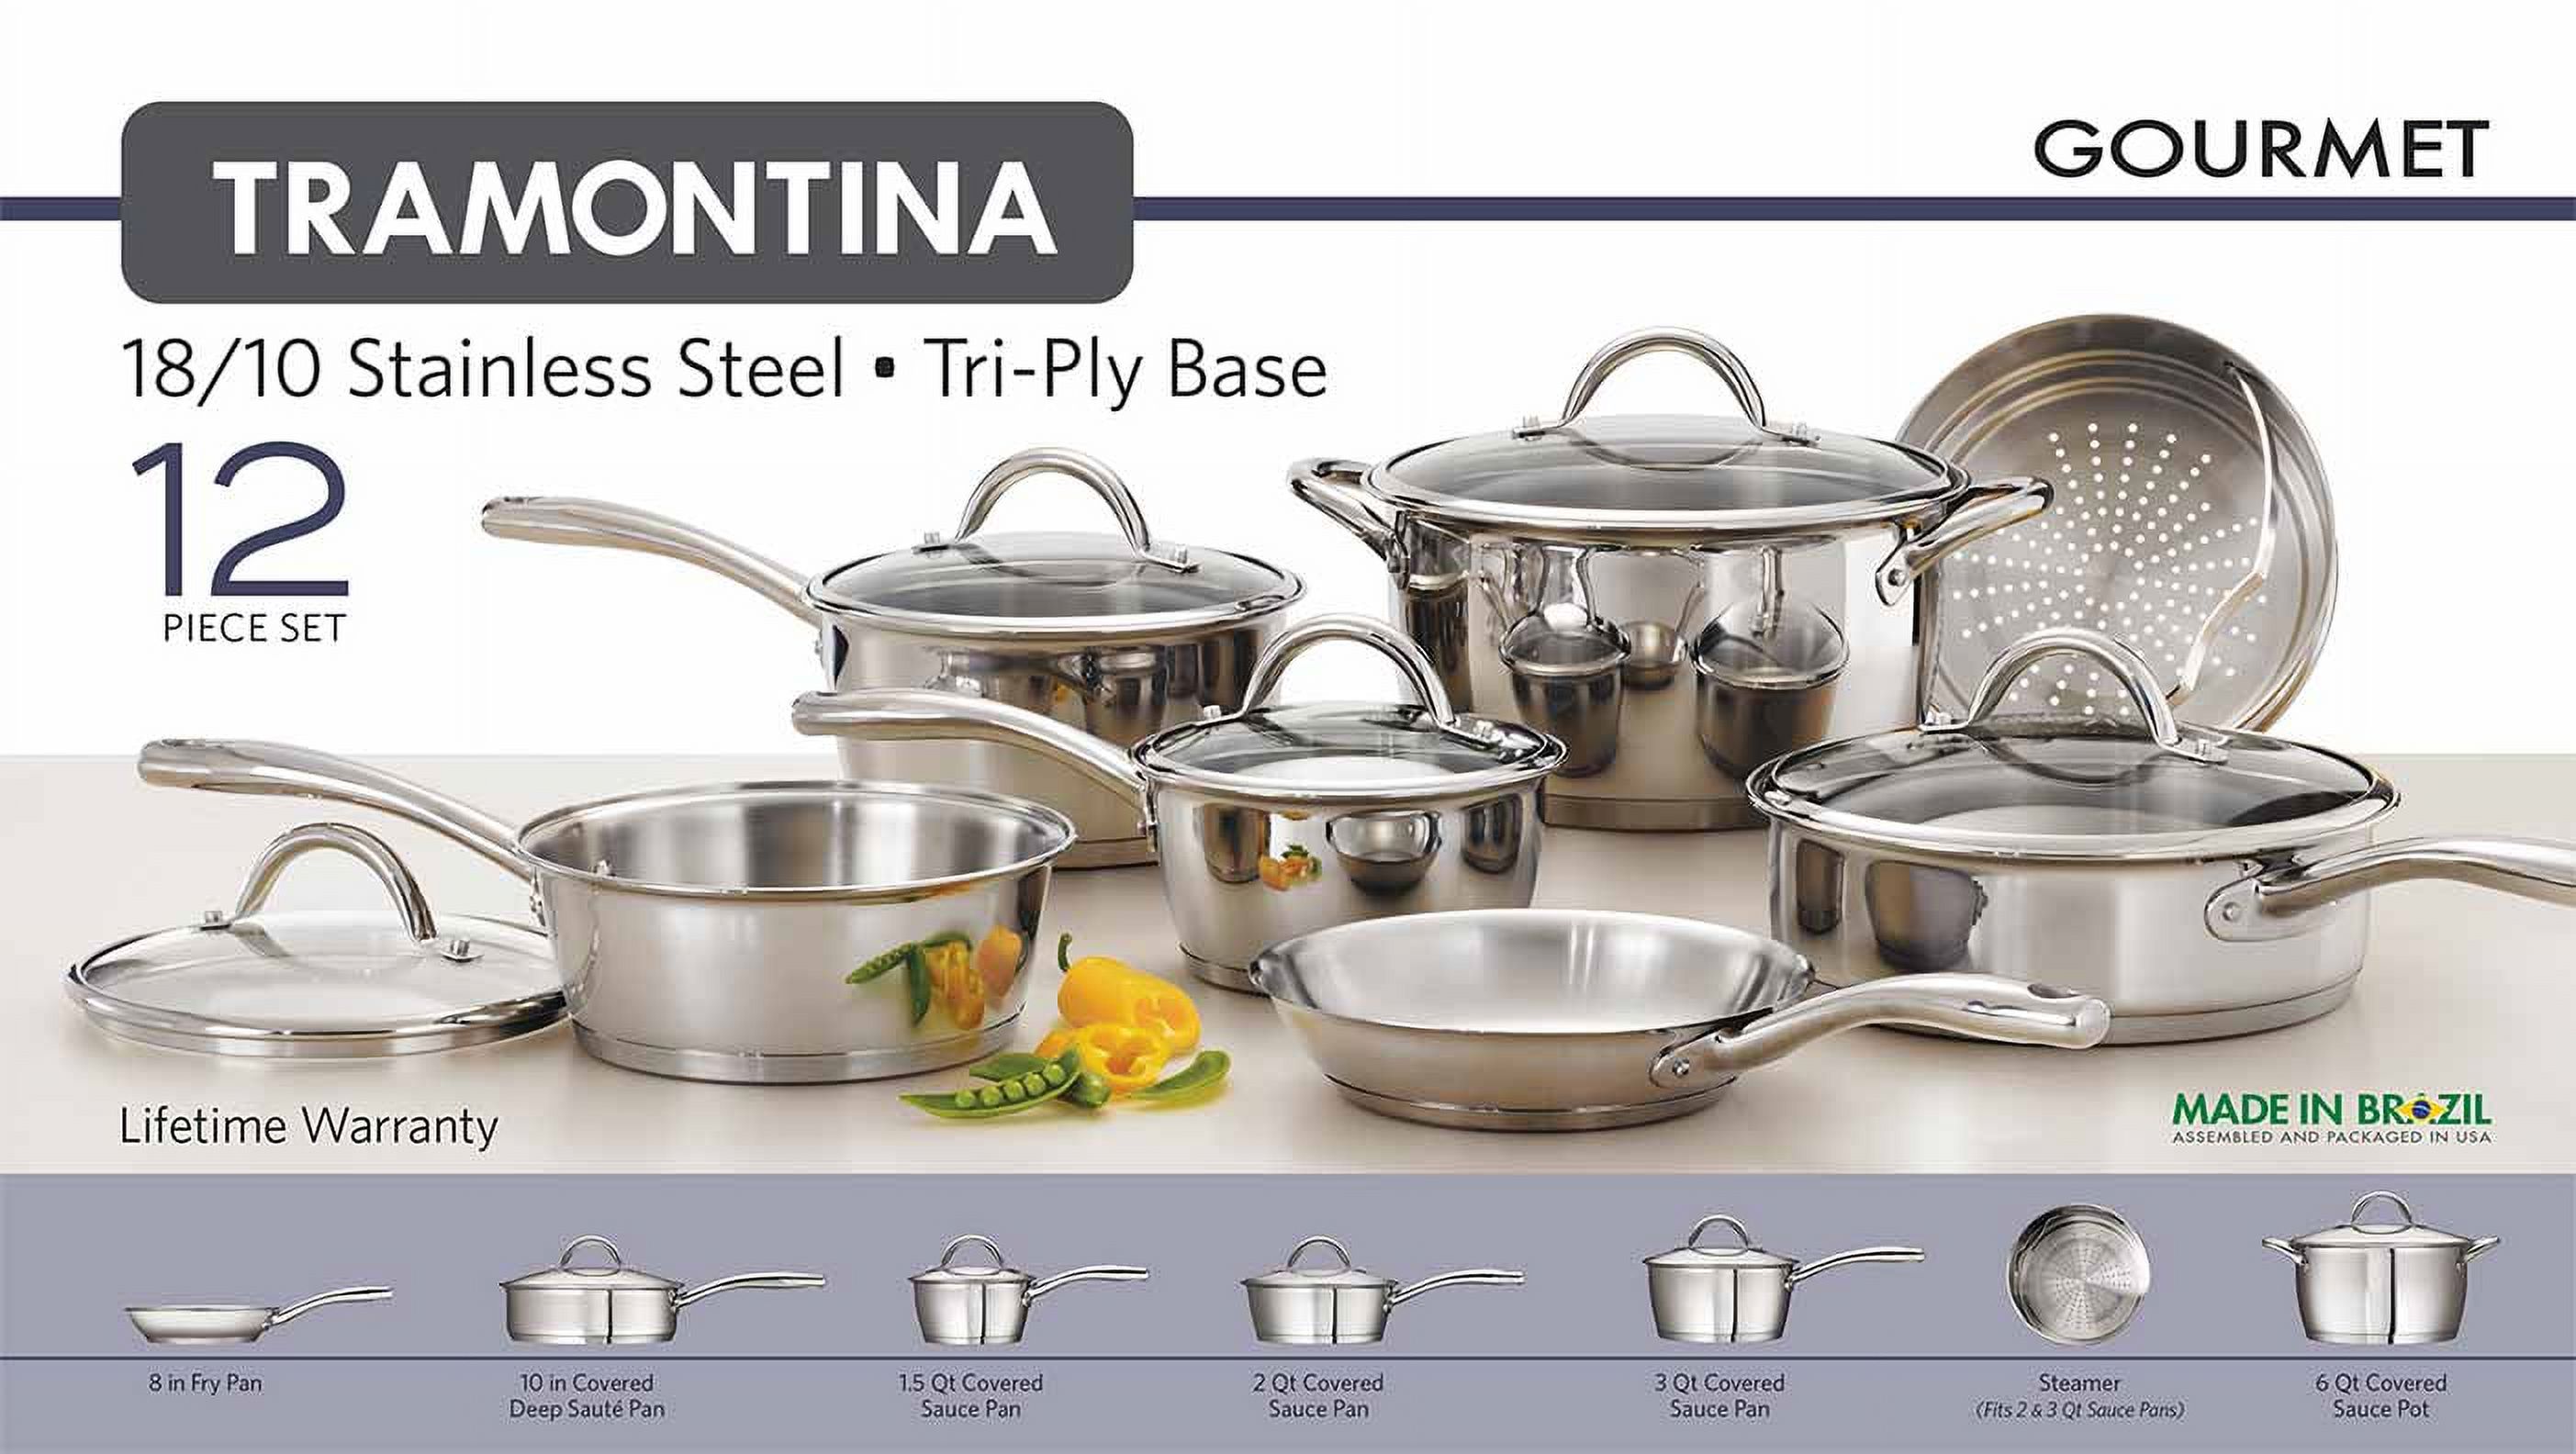 Tramontina Gourmet Stainless Steel Tri-Ply Base Cookware Set, 12 Piece - image 5 of 7